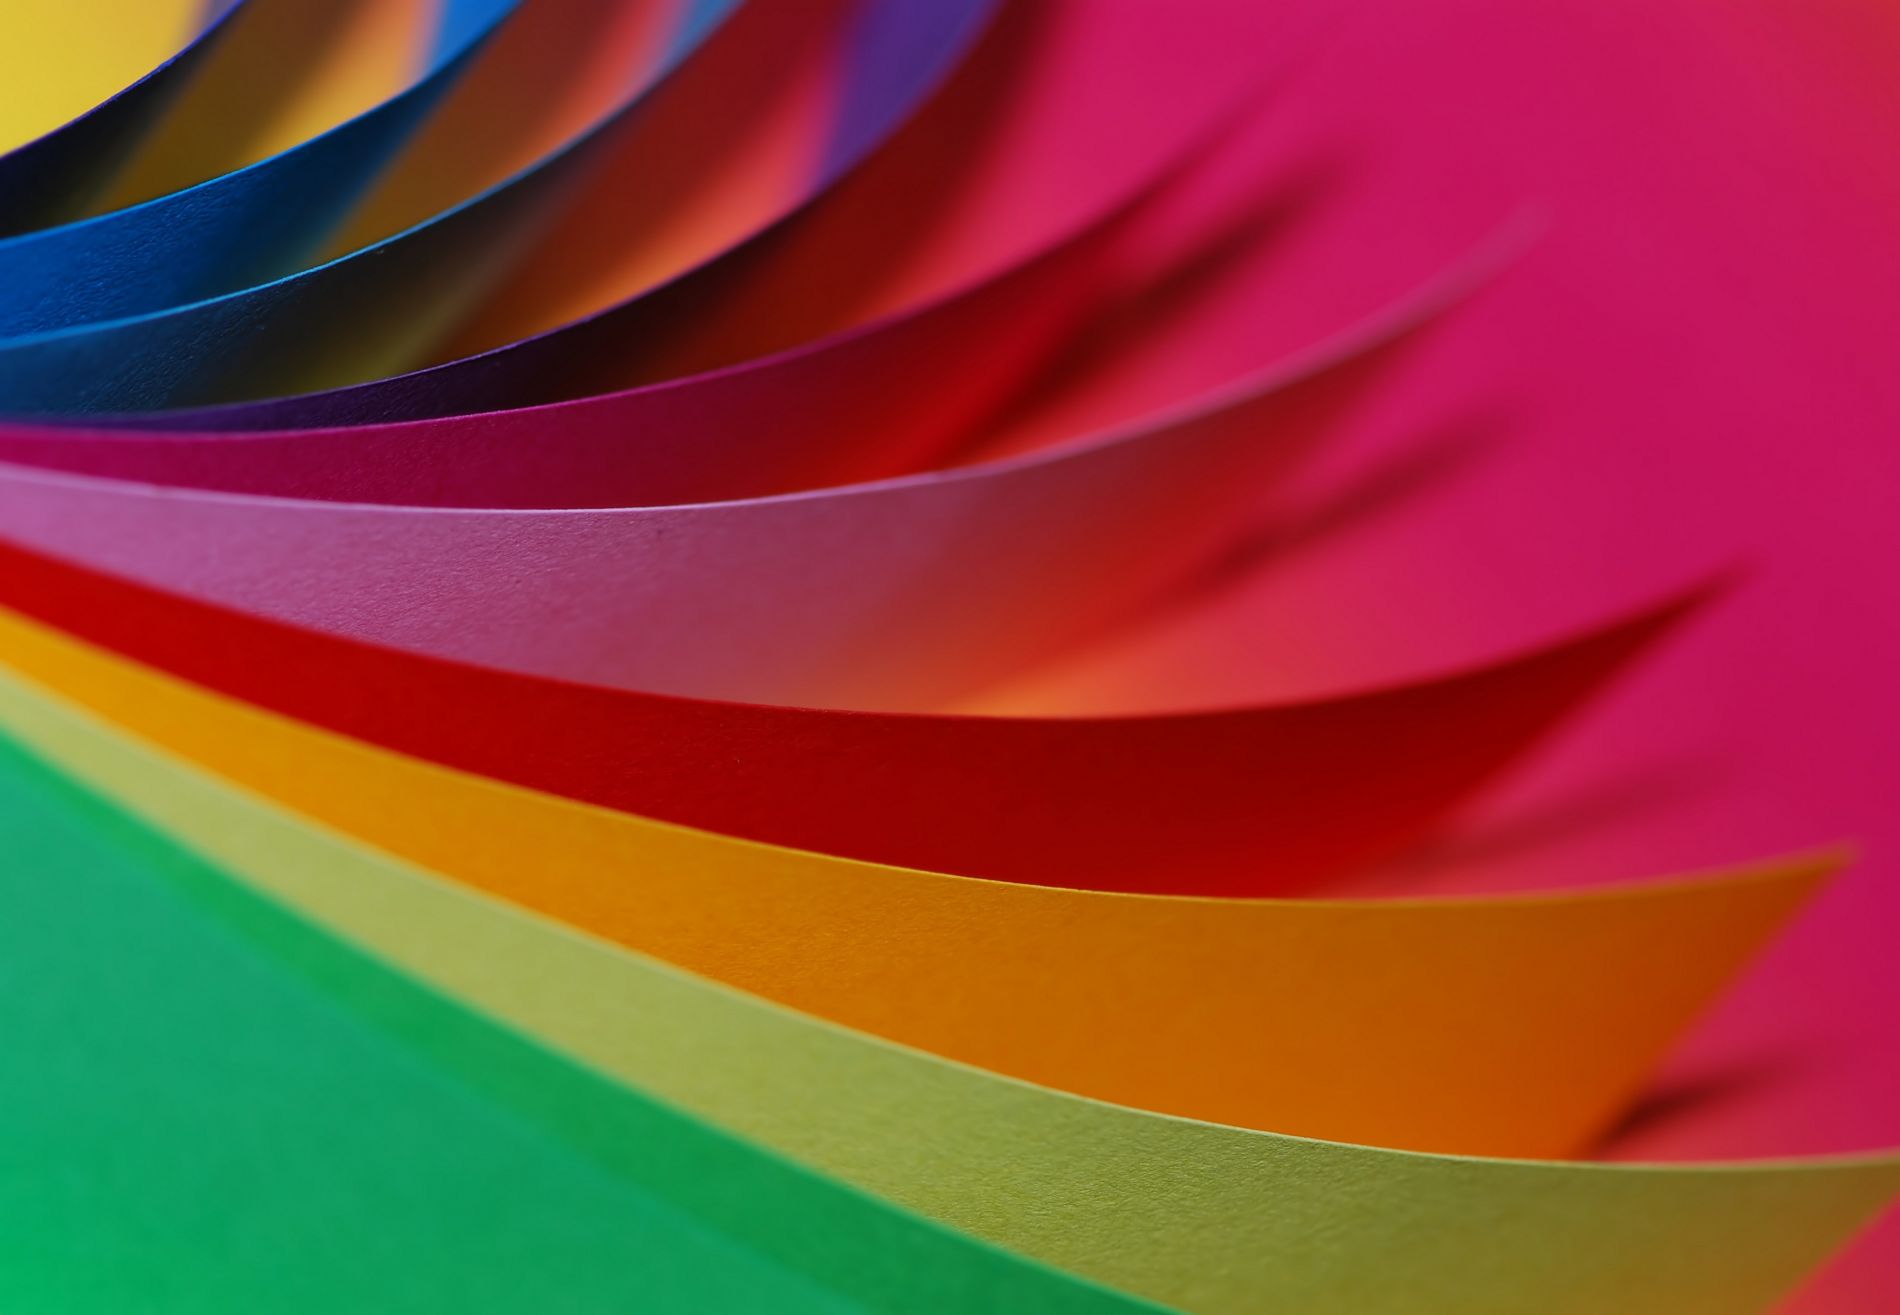 Ten pieces of colourful card paper are displayed fanned out